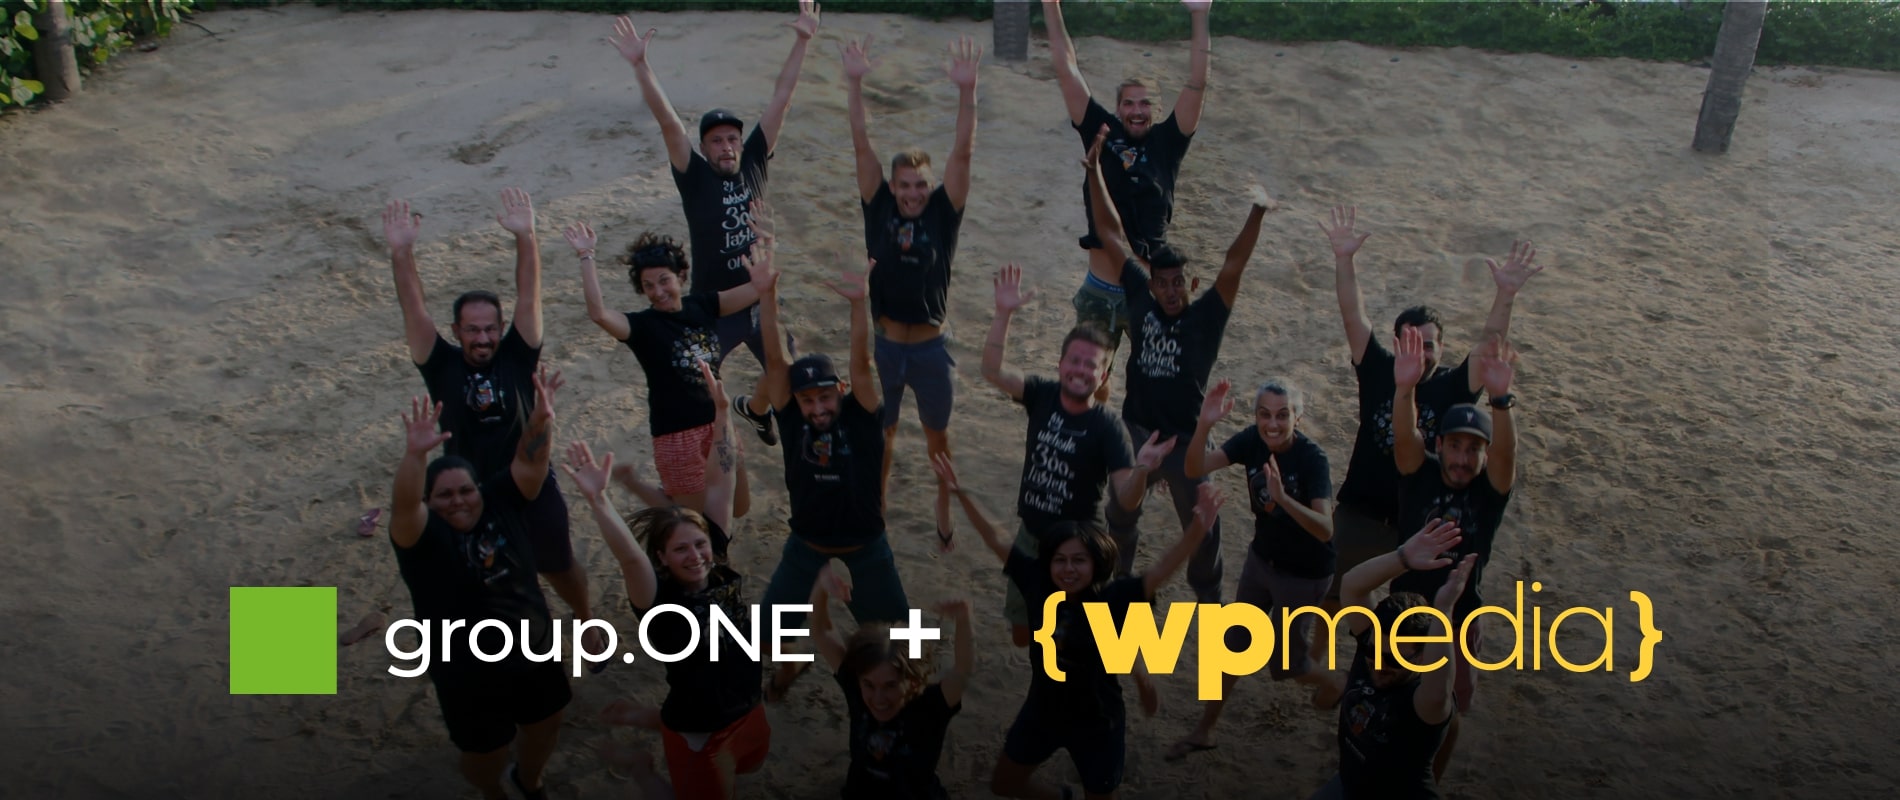 WP Media is joining group ONE